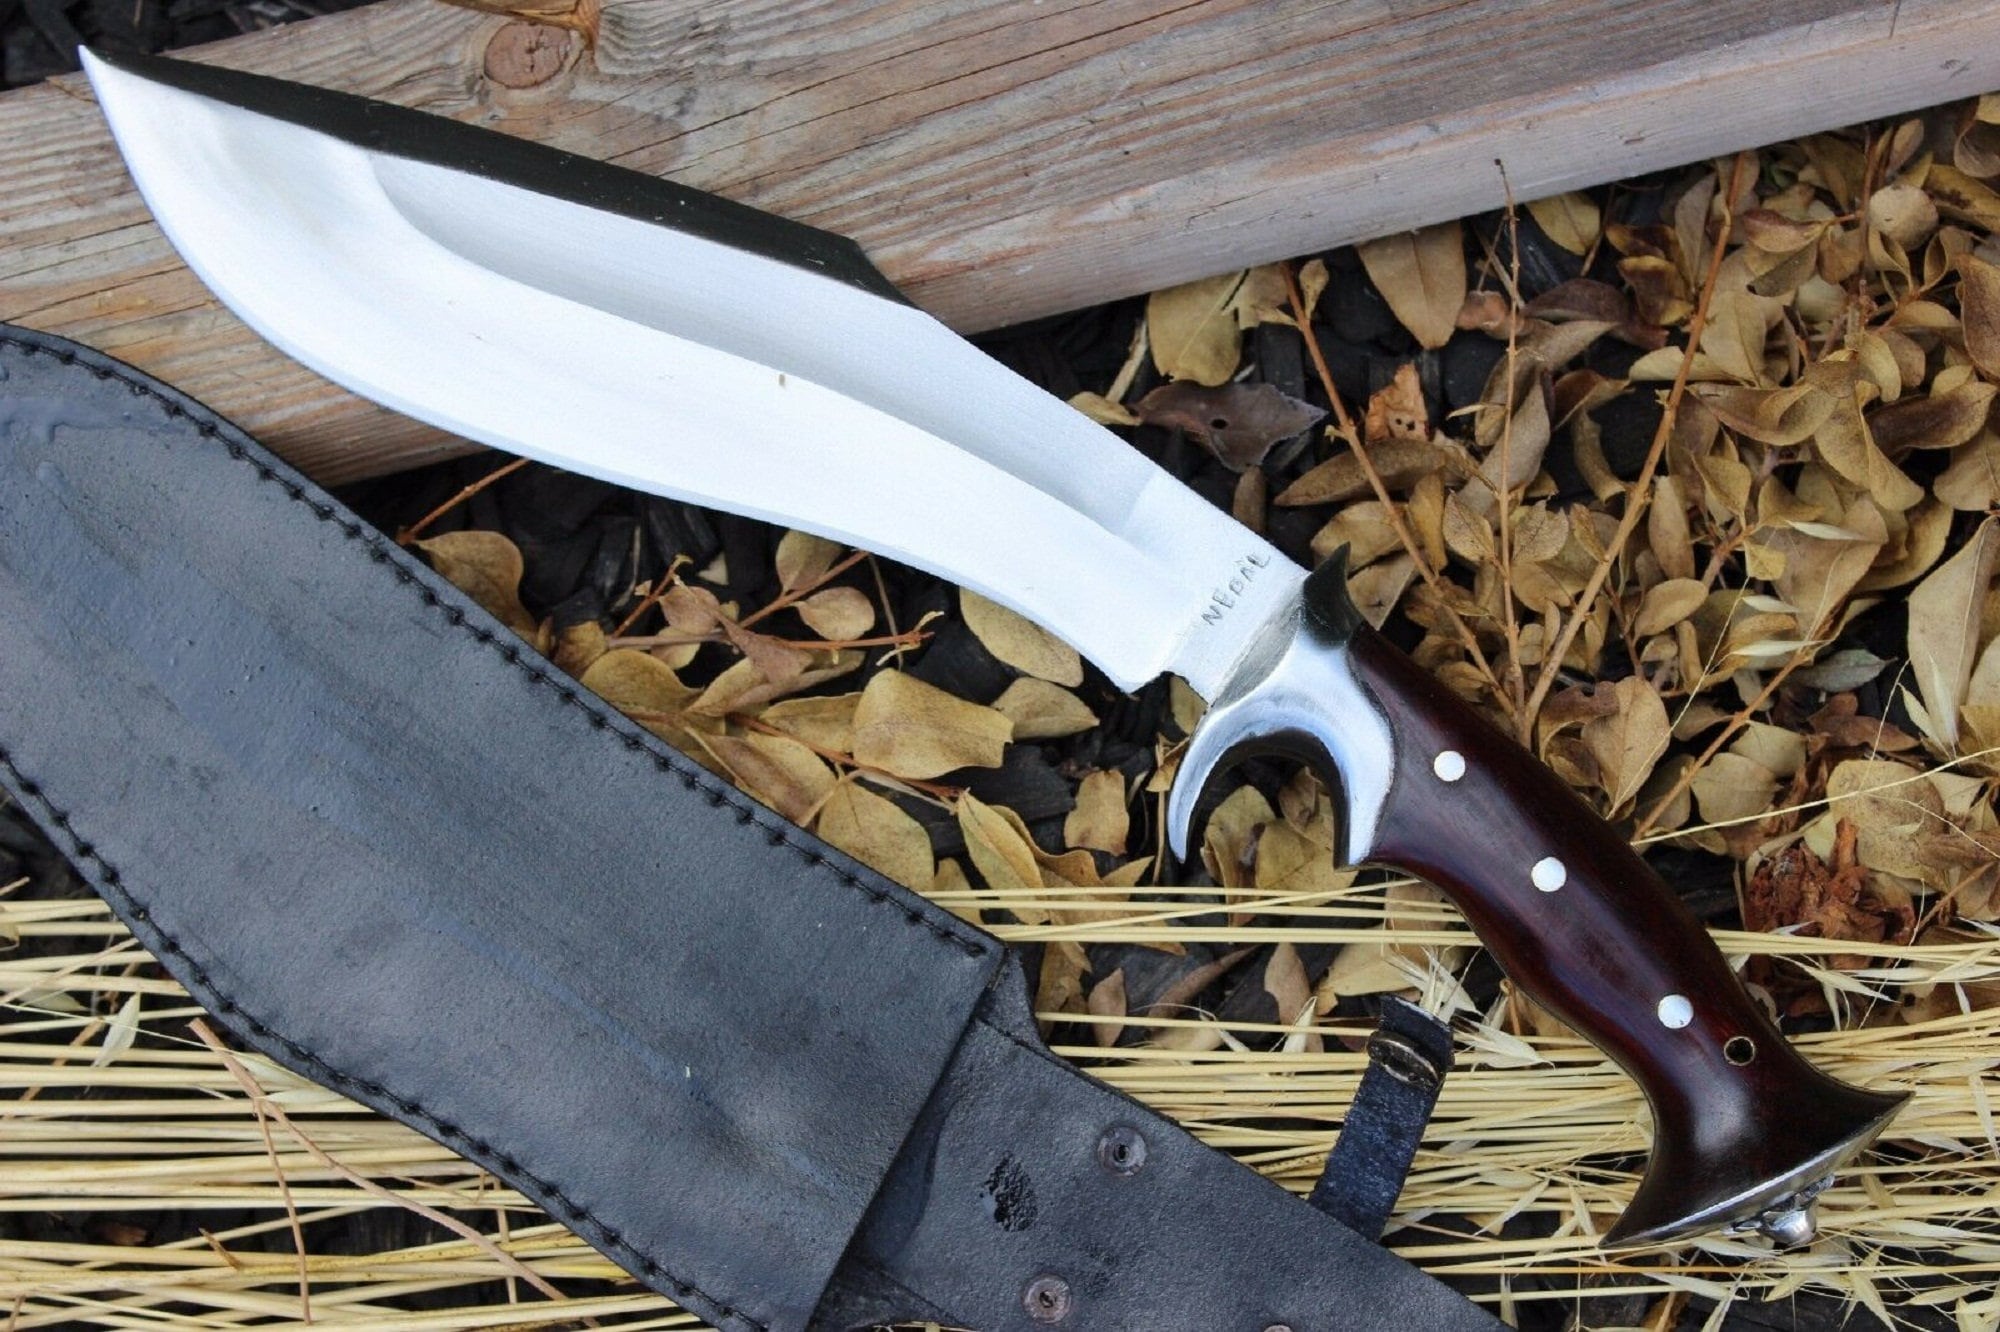 7 Of The Best Kukri Knife Options